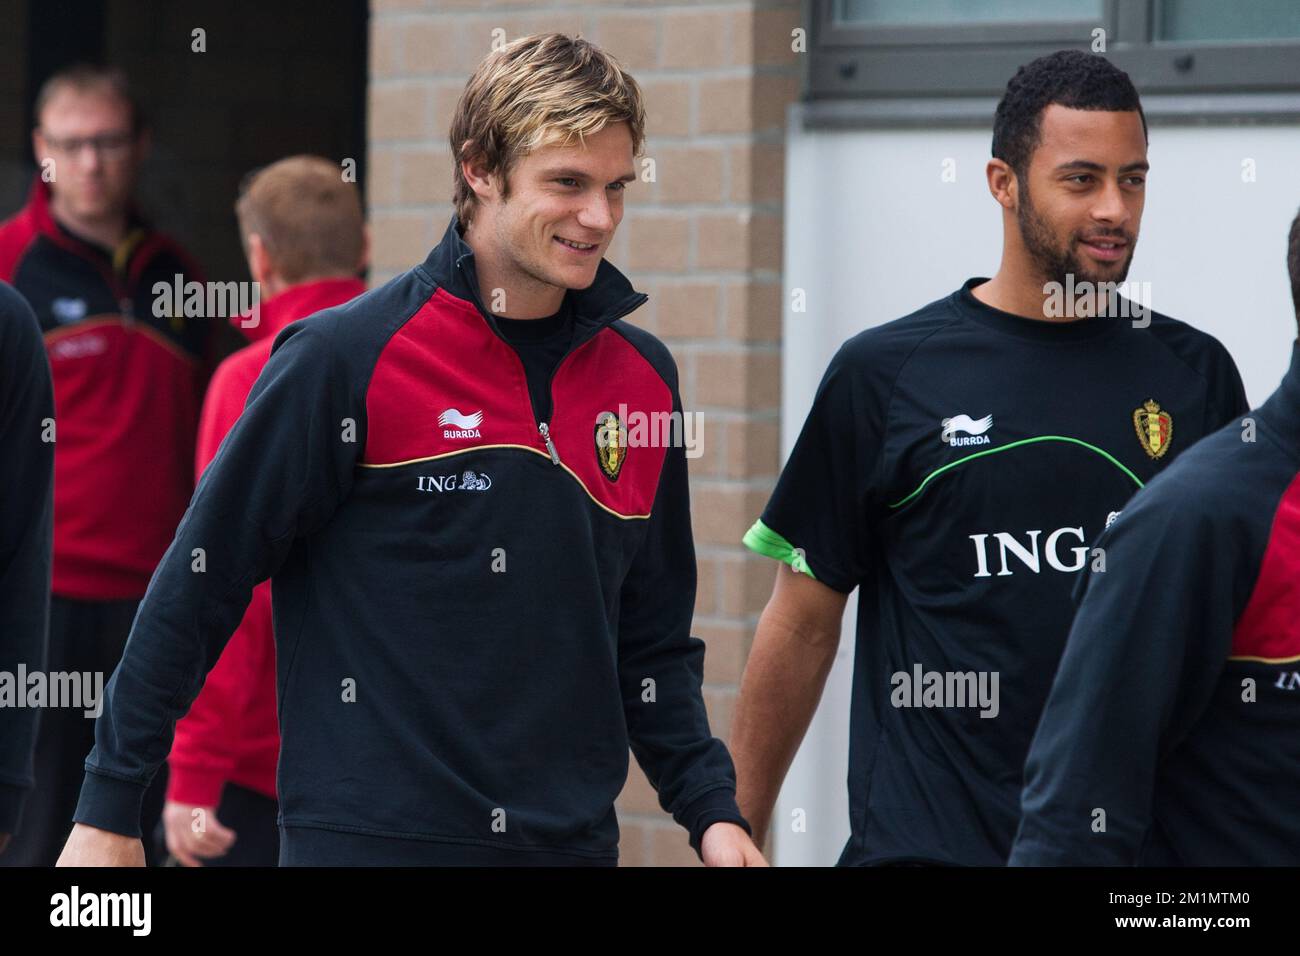 20120530 - ANGLEUR, BELGIUM: Belgium's Guillaume Gillet and Belgium's Moussa Dembele arrive for a training session of the Red Devils, the Belgian national soccer team, Wednesday 30 May 2012 in Angleur. The team is preparing for a friendly game against England next Saturday.  BELGA PHOTO BRUNO FAHY Stock Photo